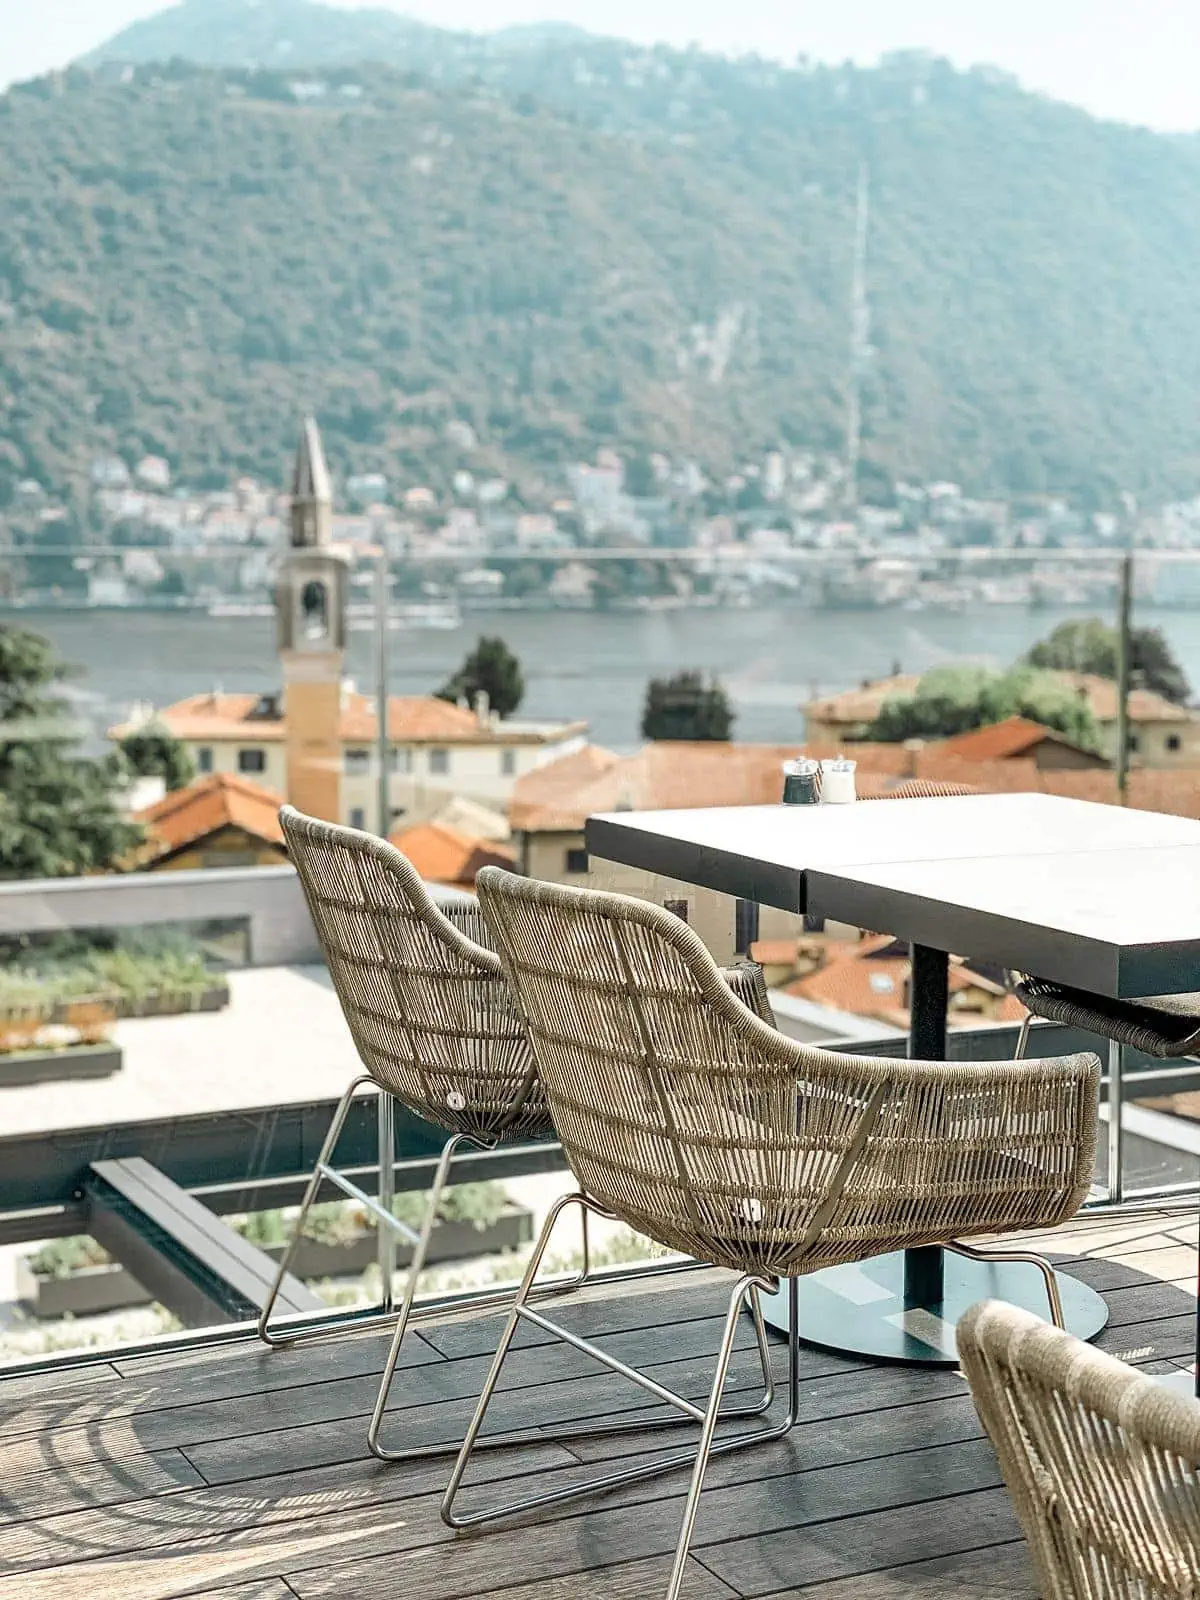 Outdoor terrace seating overlooking Lake Como at Hilton hotel